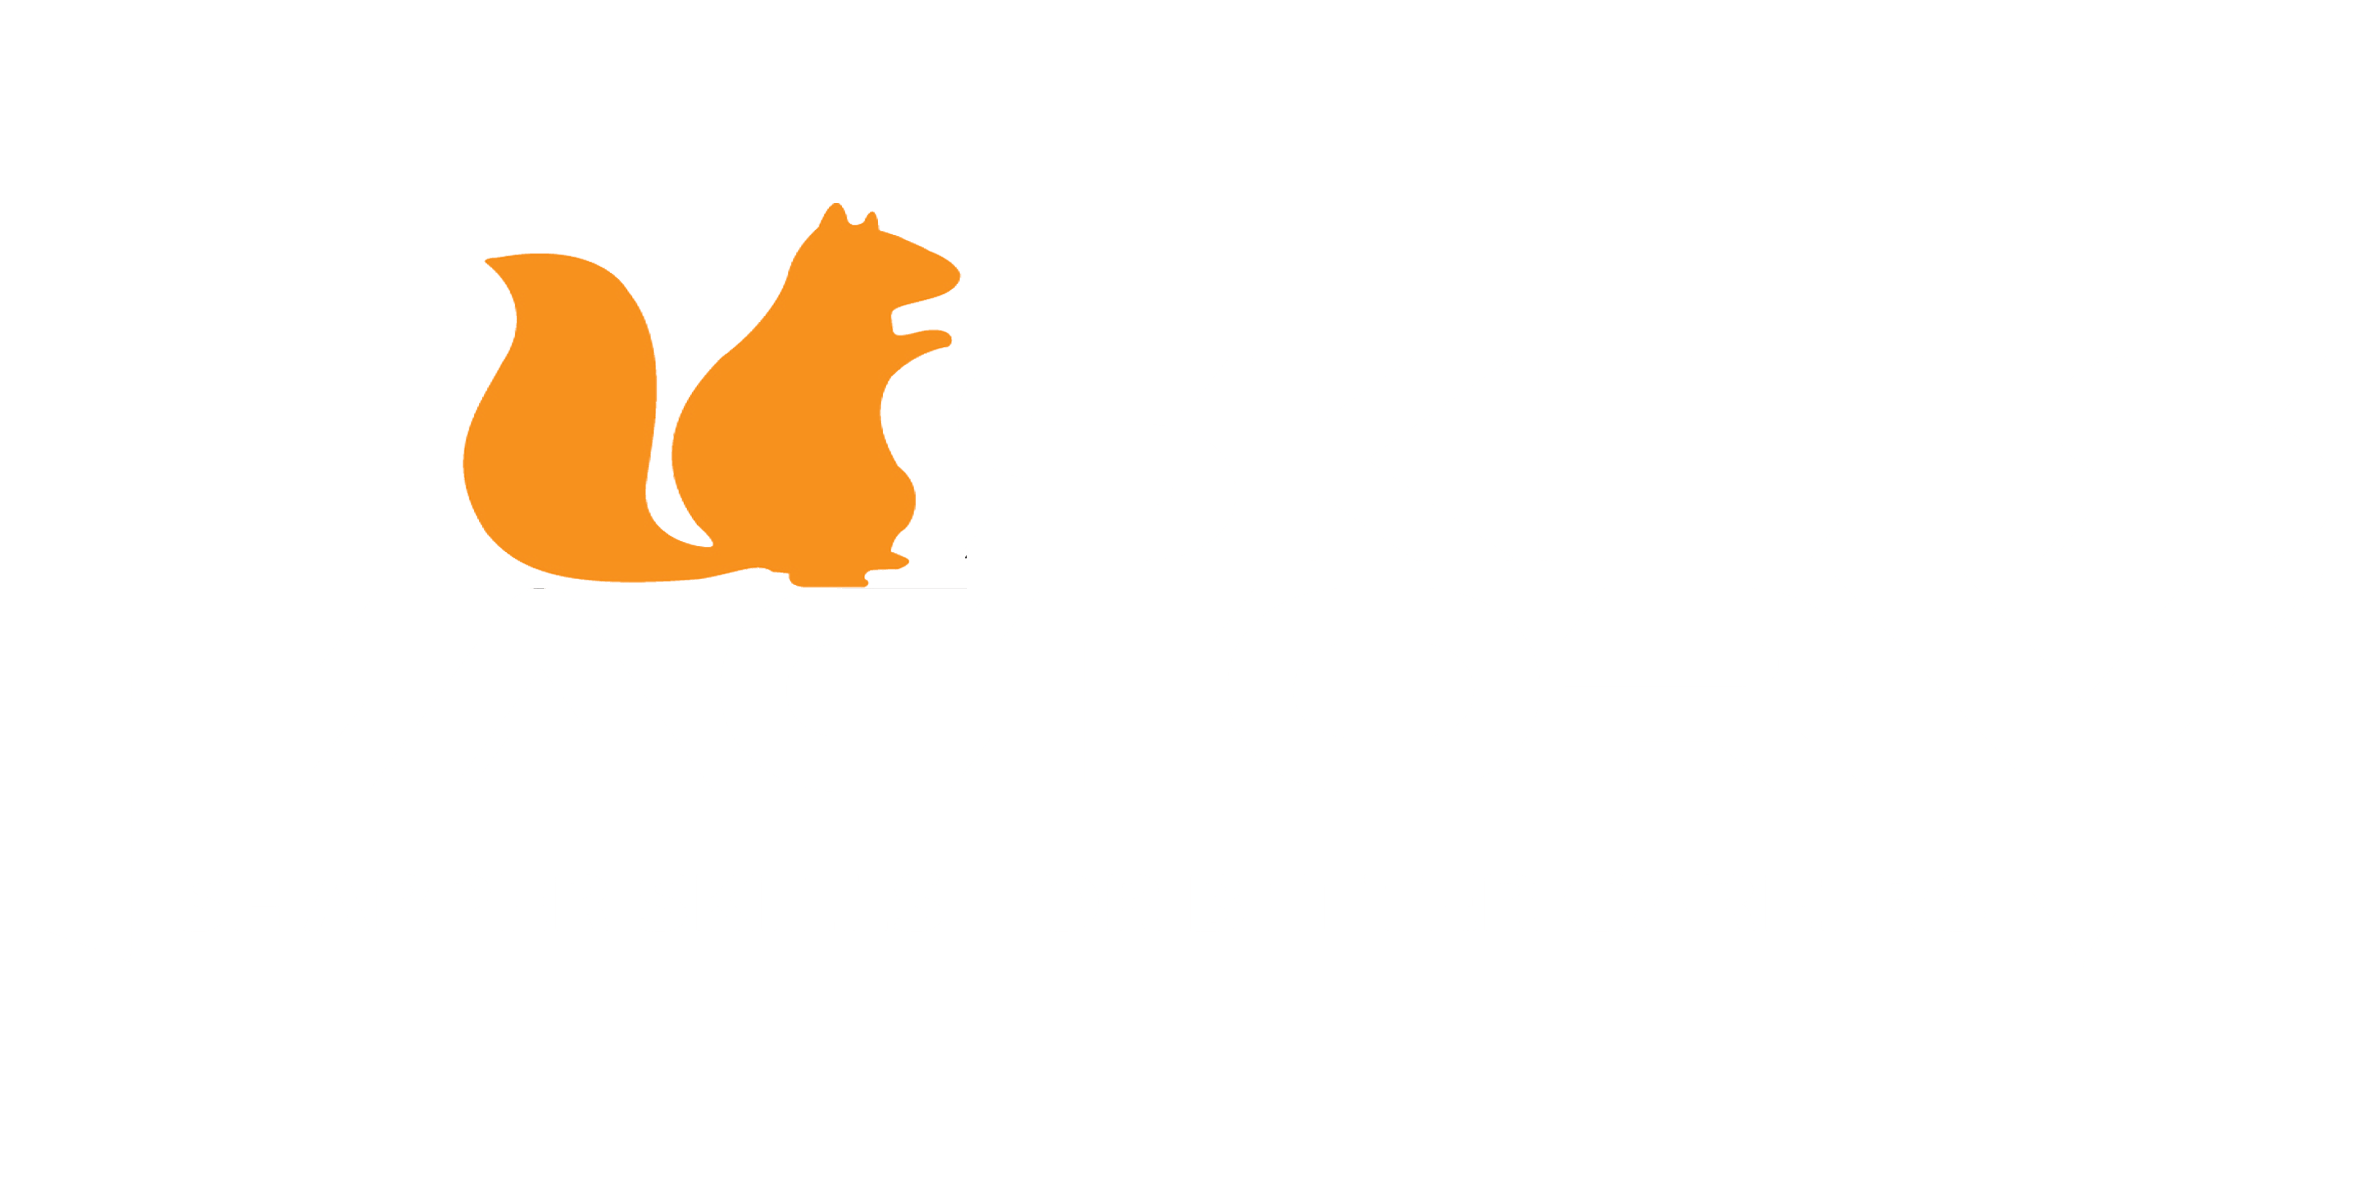 skills factory - india cyber security and networking traning institute in pune.